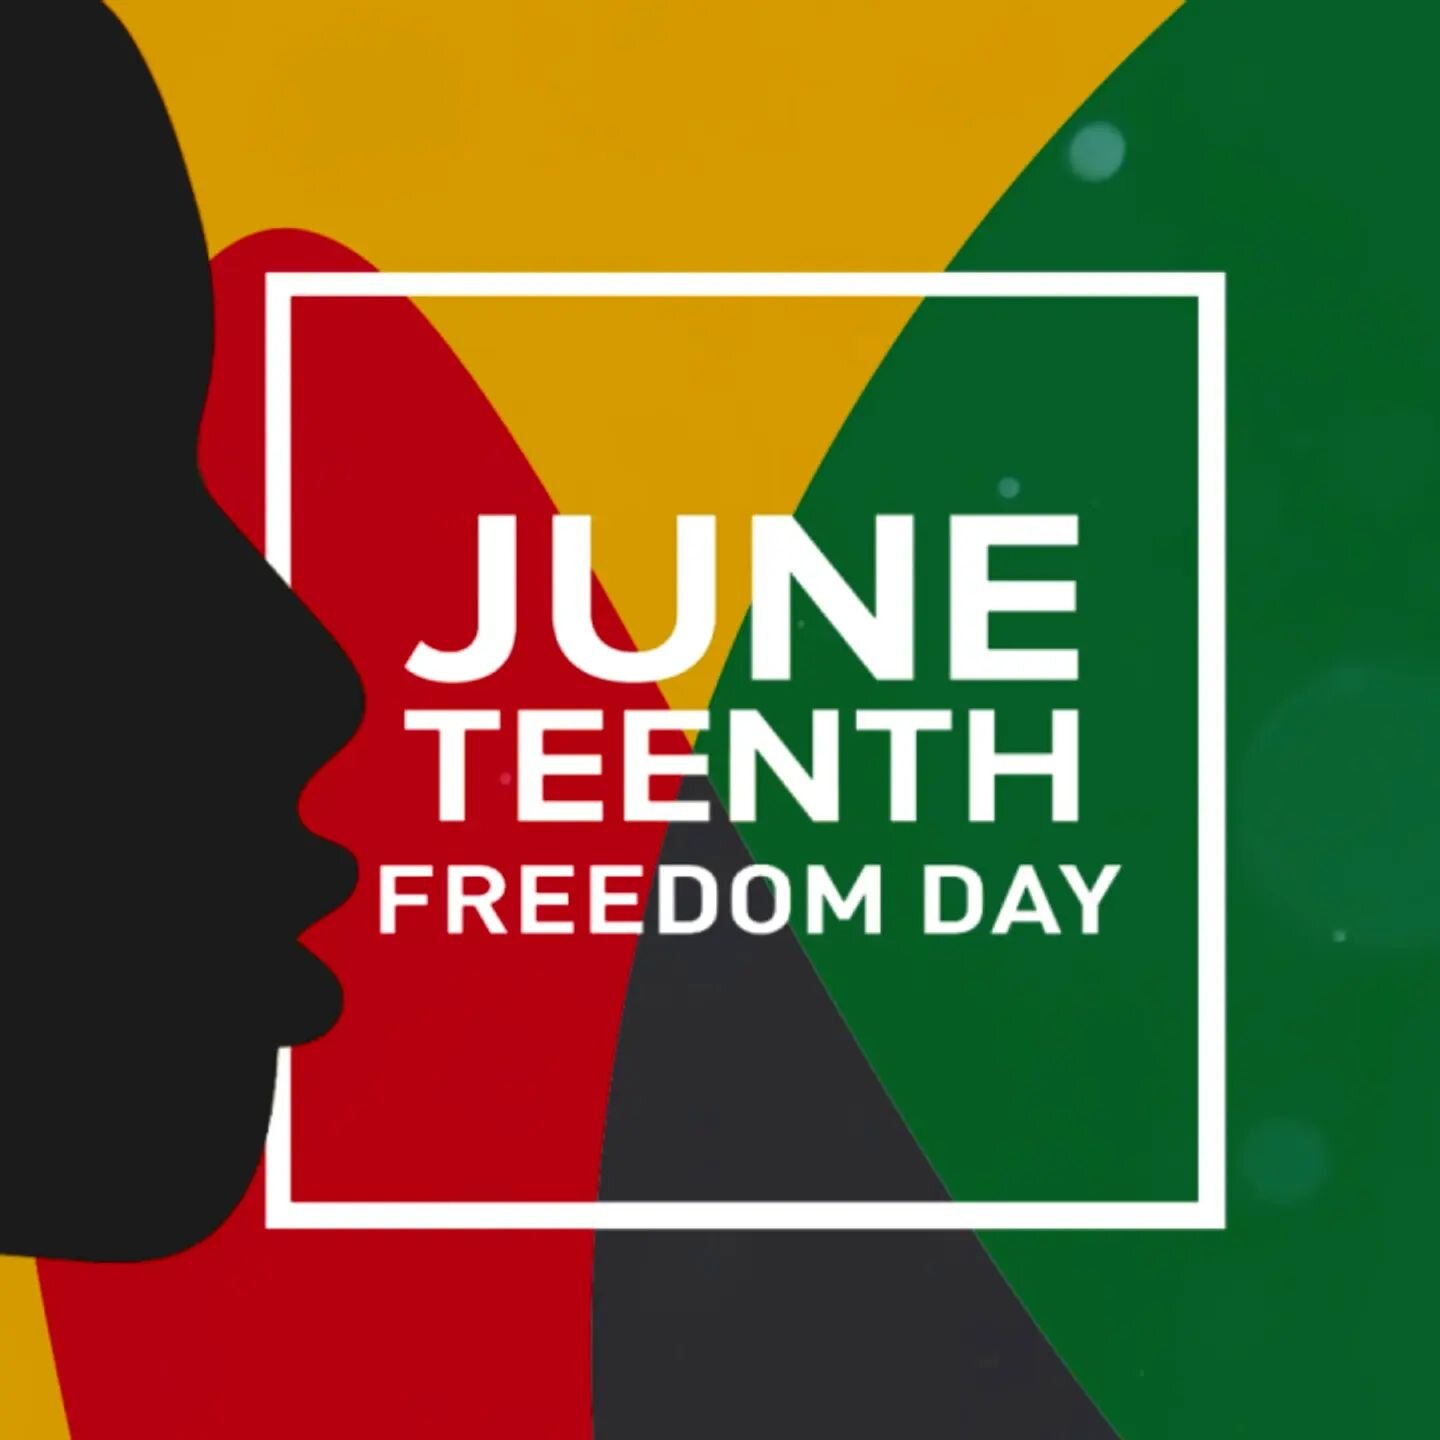 Happy Juneteenth! We are OPEN till 3pm today in observance. #freedom